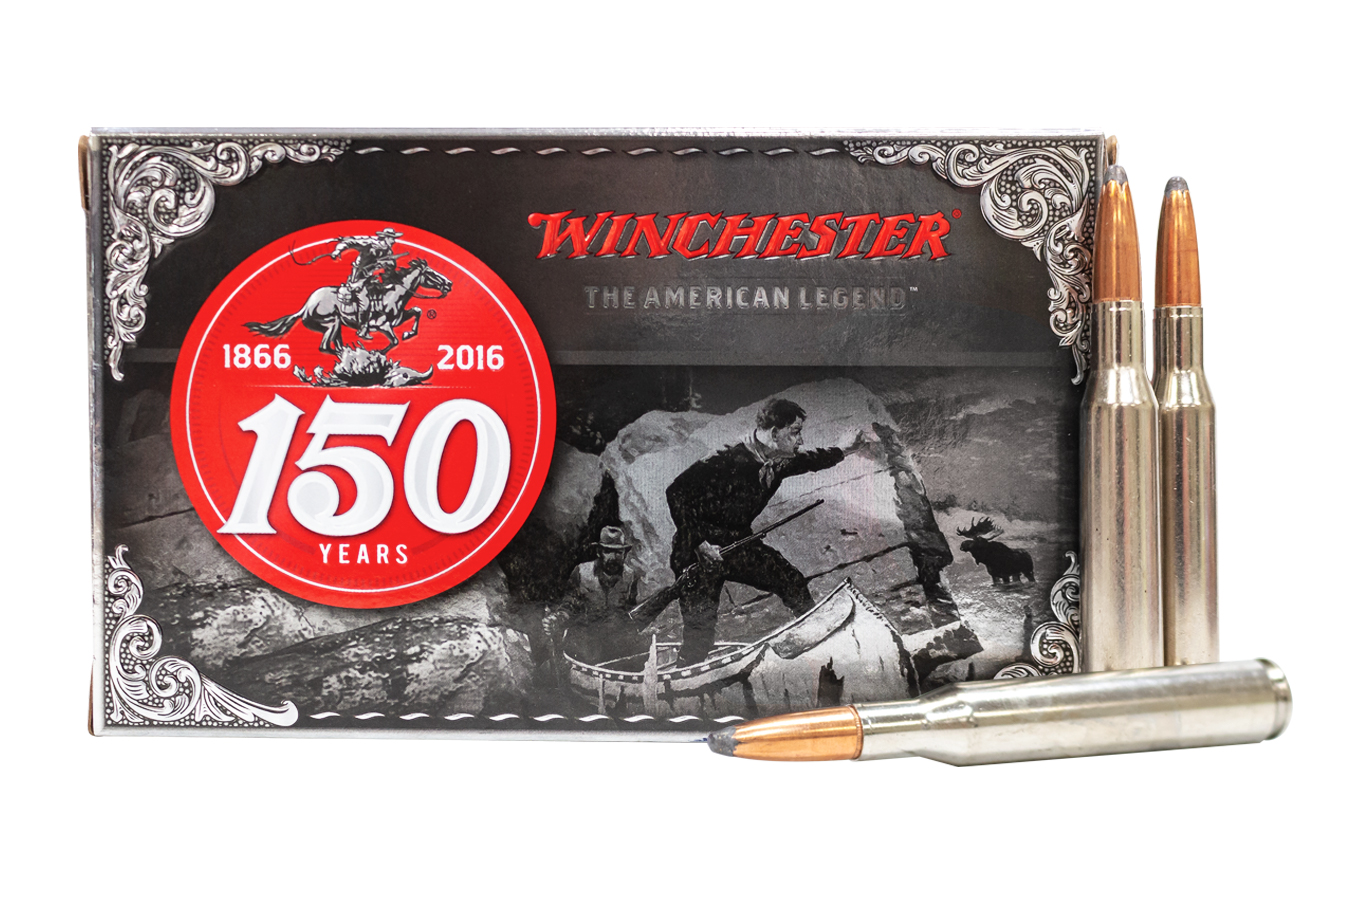 WINCHESTER AMMO 270 WIN 150 GR POWER POINT 150TH ANNIVERSARY